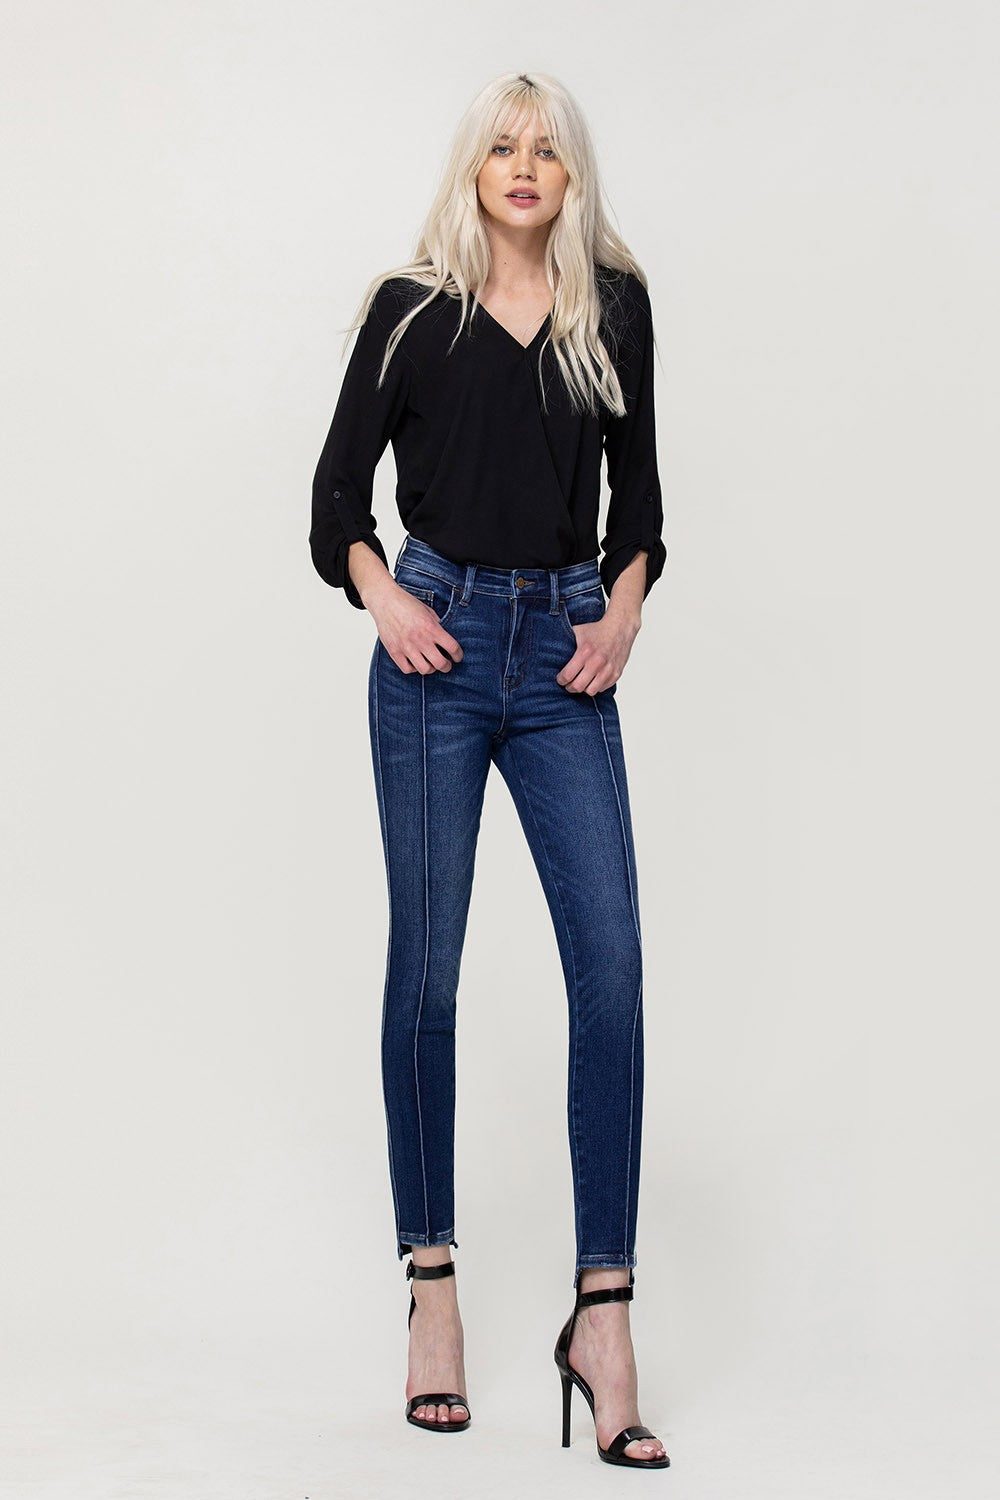 FLYING MONEY- HIGH RISE ANKLE SKINNY W FRONT SEAM AND UNEVEN HEM F4388 - SKINNY JEAN